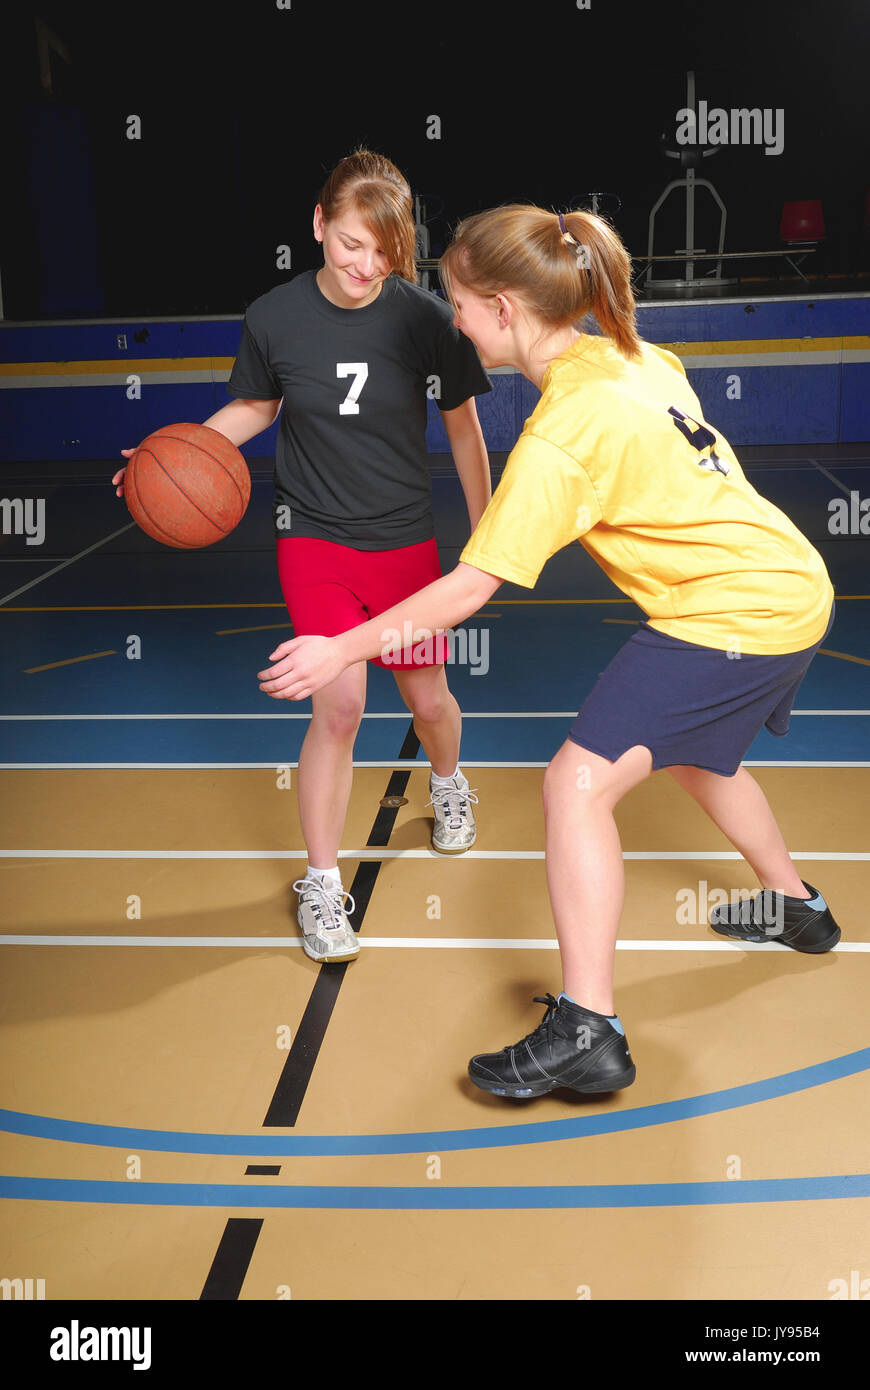 Two female basketball players compete in gym Stock Photo